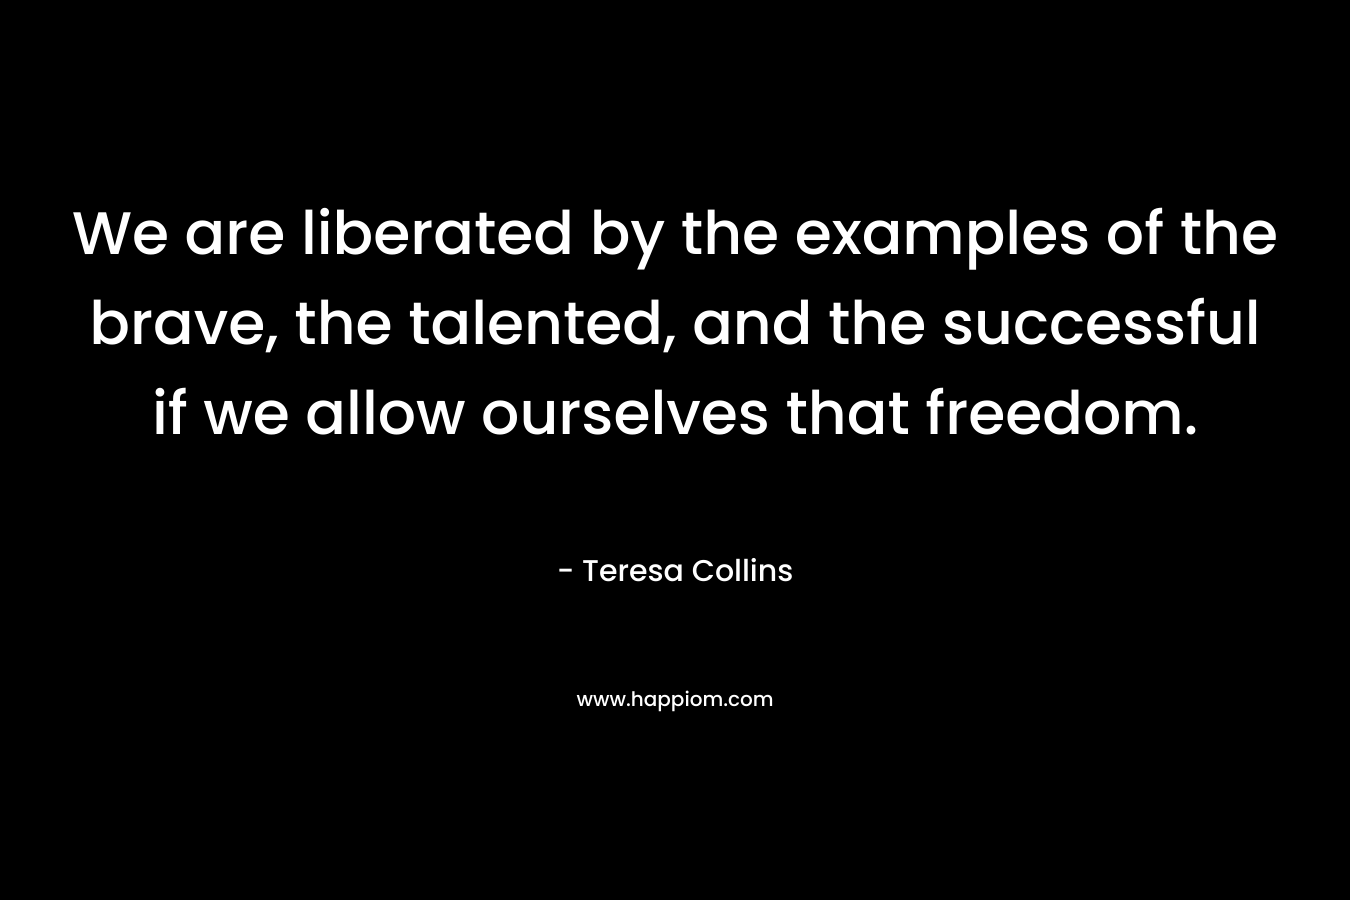 We are liberated by the examples of the brave, the talented, and the successful if we allow ourselves that freedom. – Teresa Collins